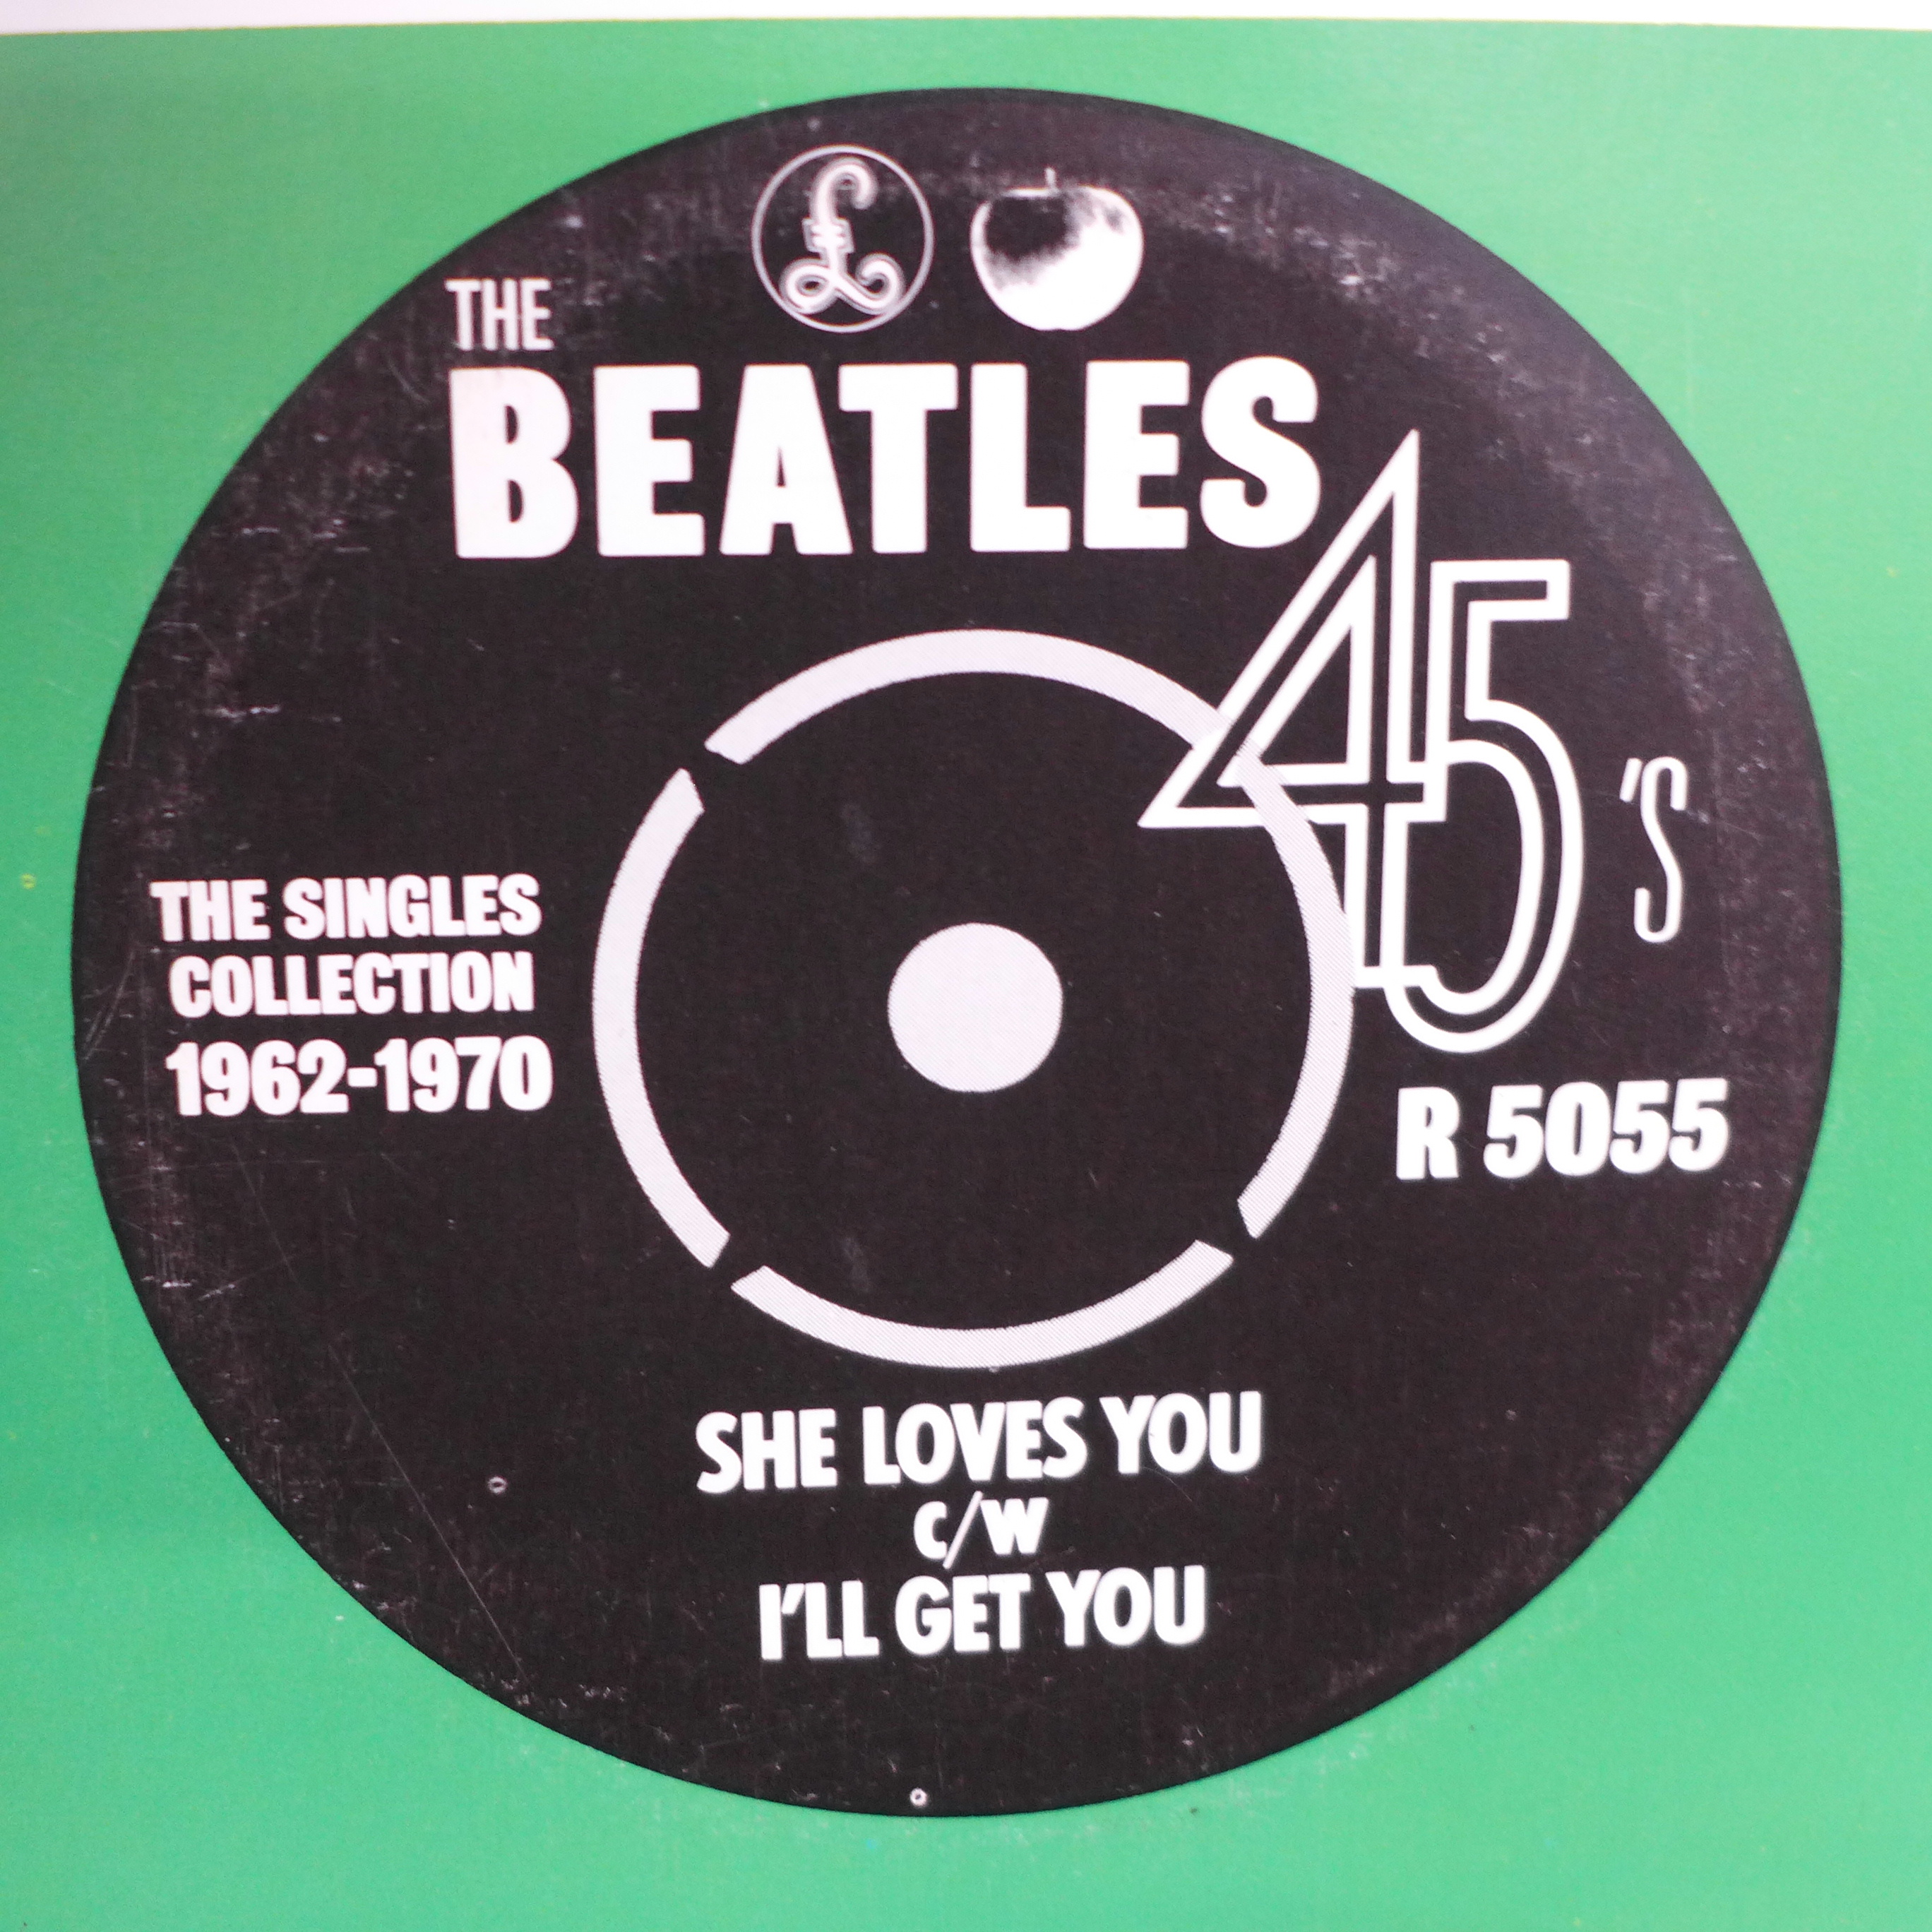 The Beatles Collection, set of 7" 45rpm singles, (24) - Image 3 of 3